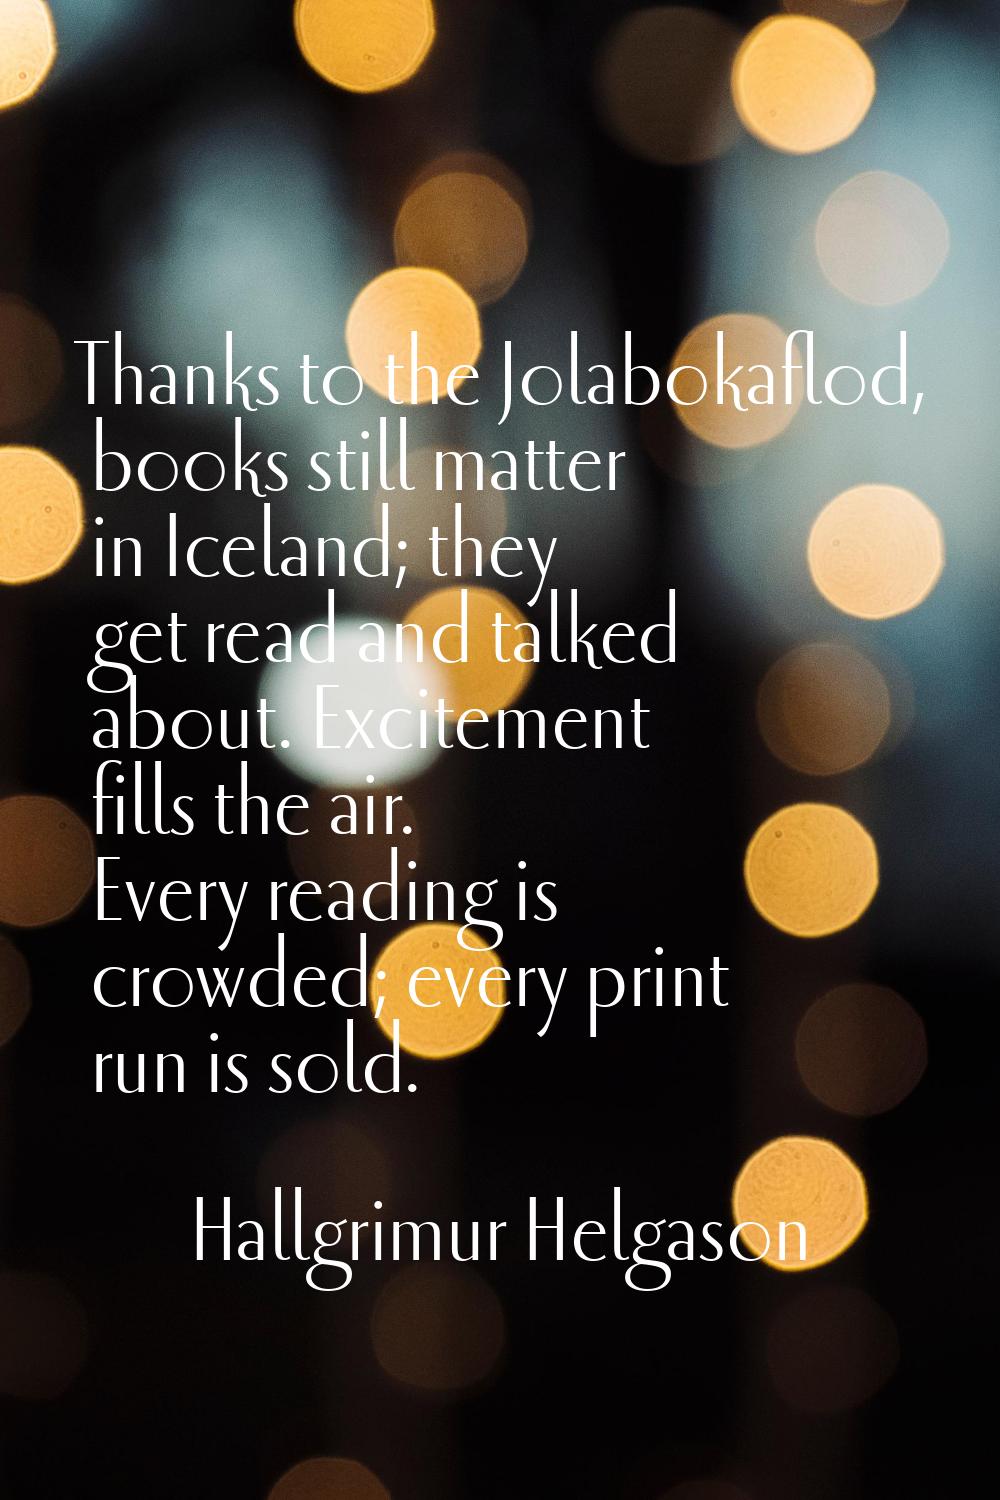 Thanks to the Jolabokaflod, books still matter in Iceland; they get read and talked about. Exciteme